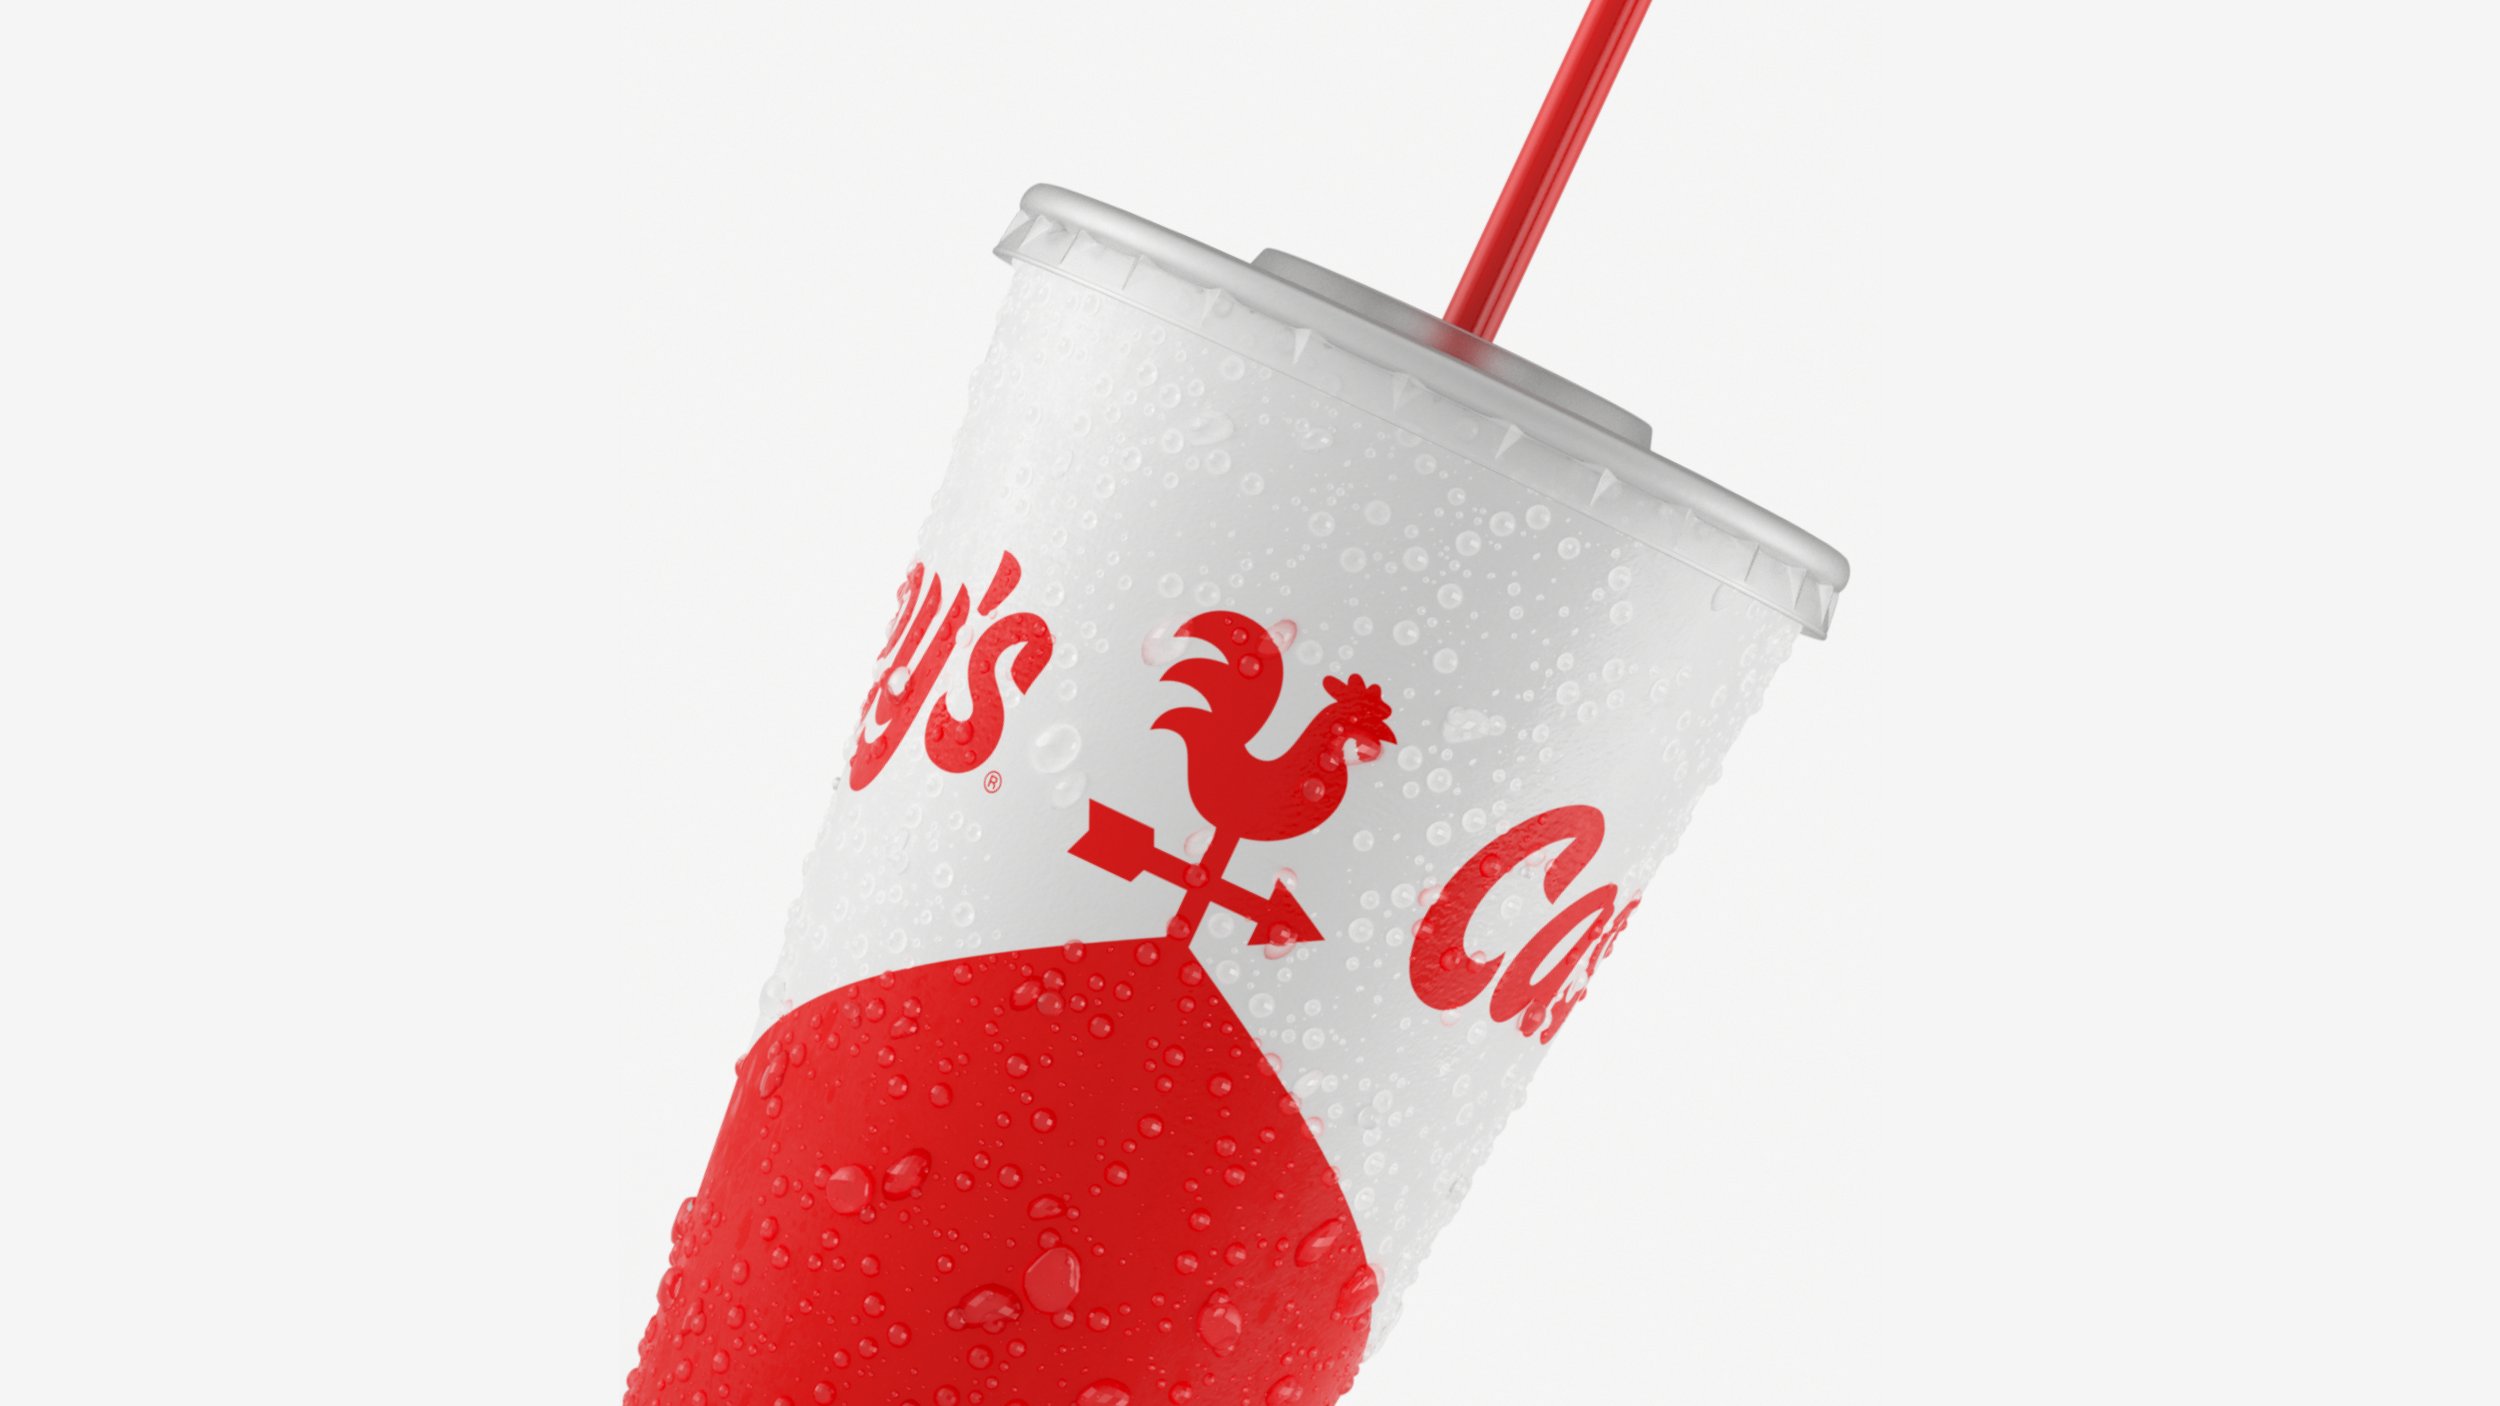 Casey's fountain drink cup.jpg